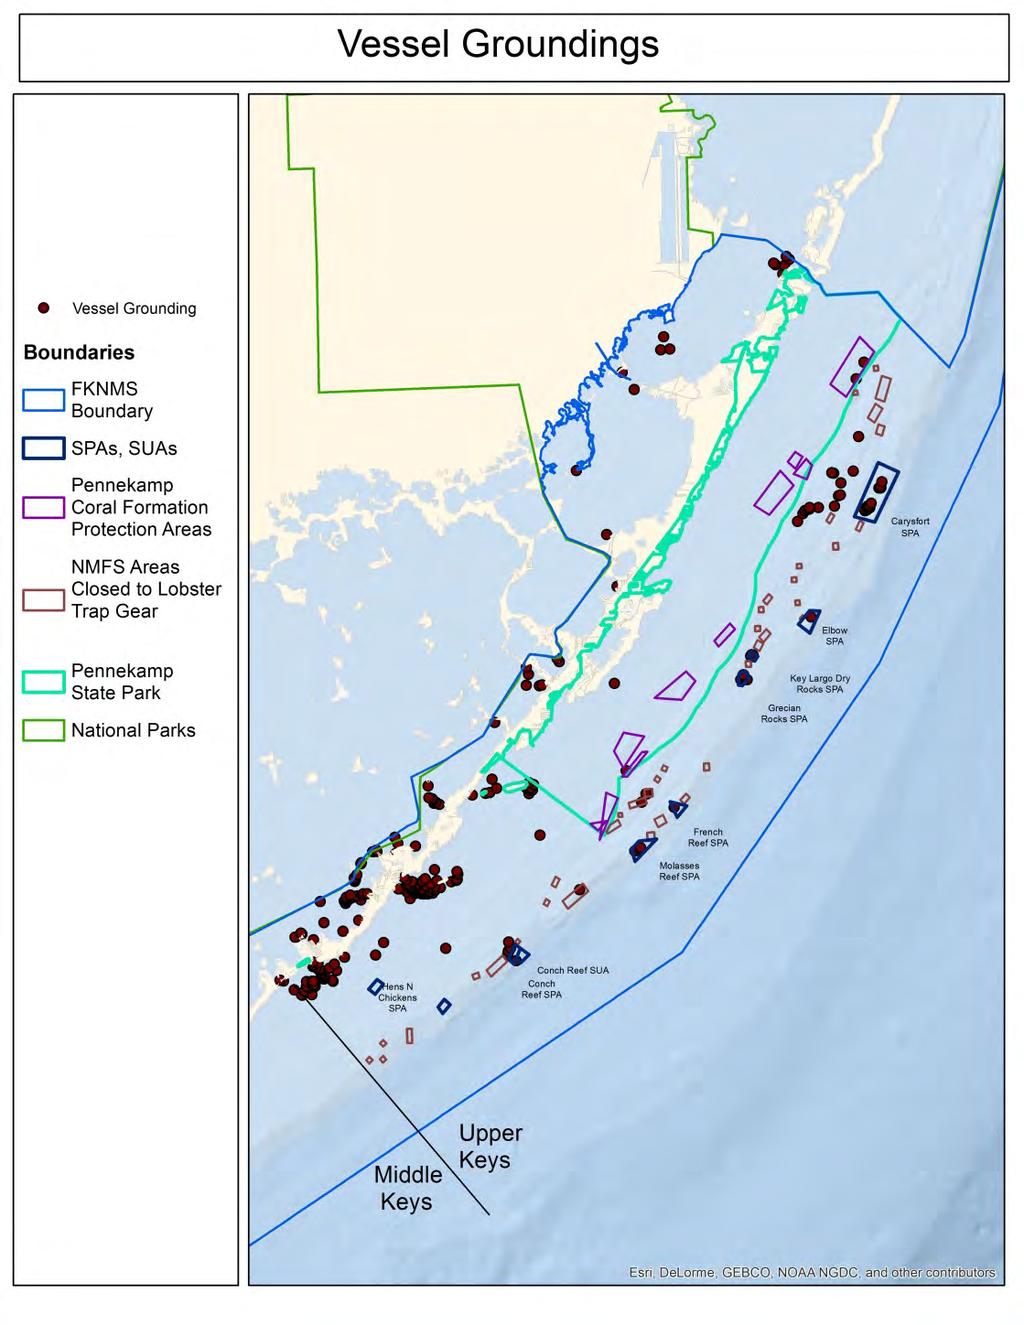 Impacts Vessel Groundings Management Zone Groundings (#) SPAs, SUAs 47 NMFS and Pennekamp lobster management